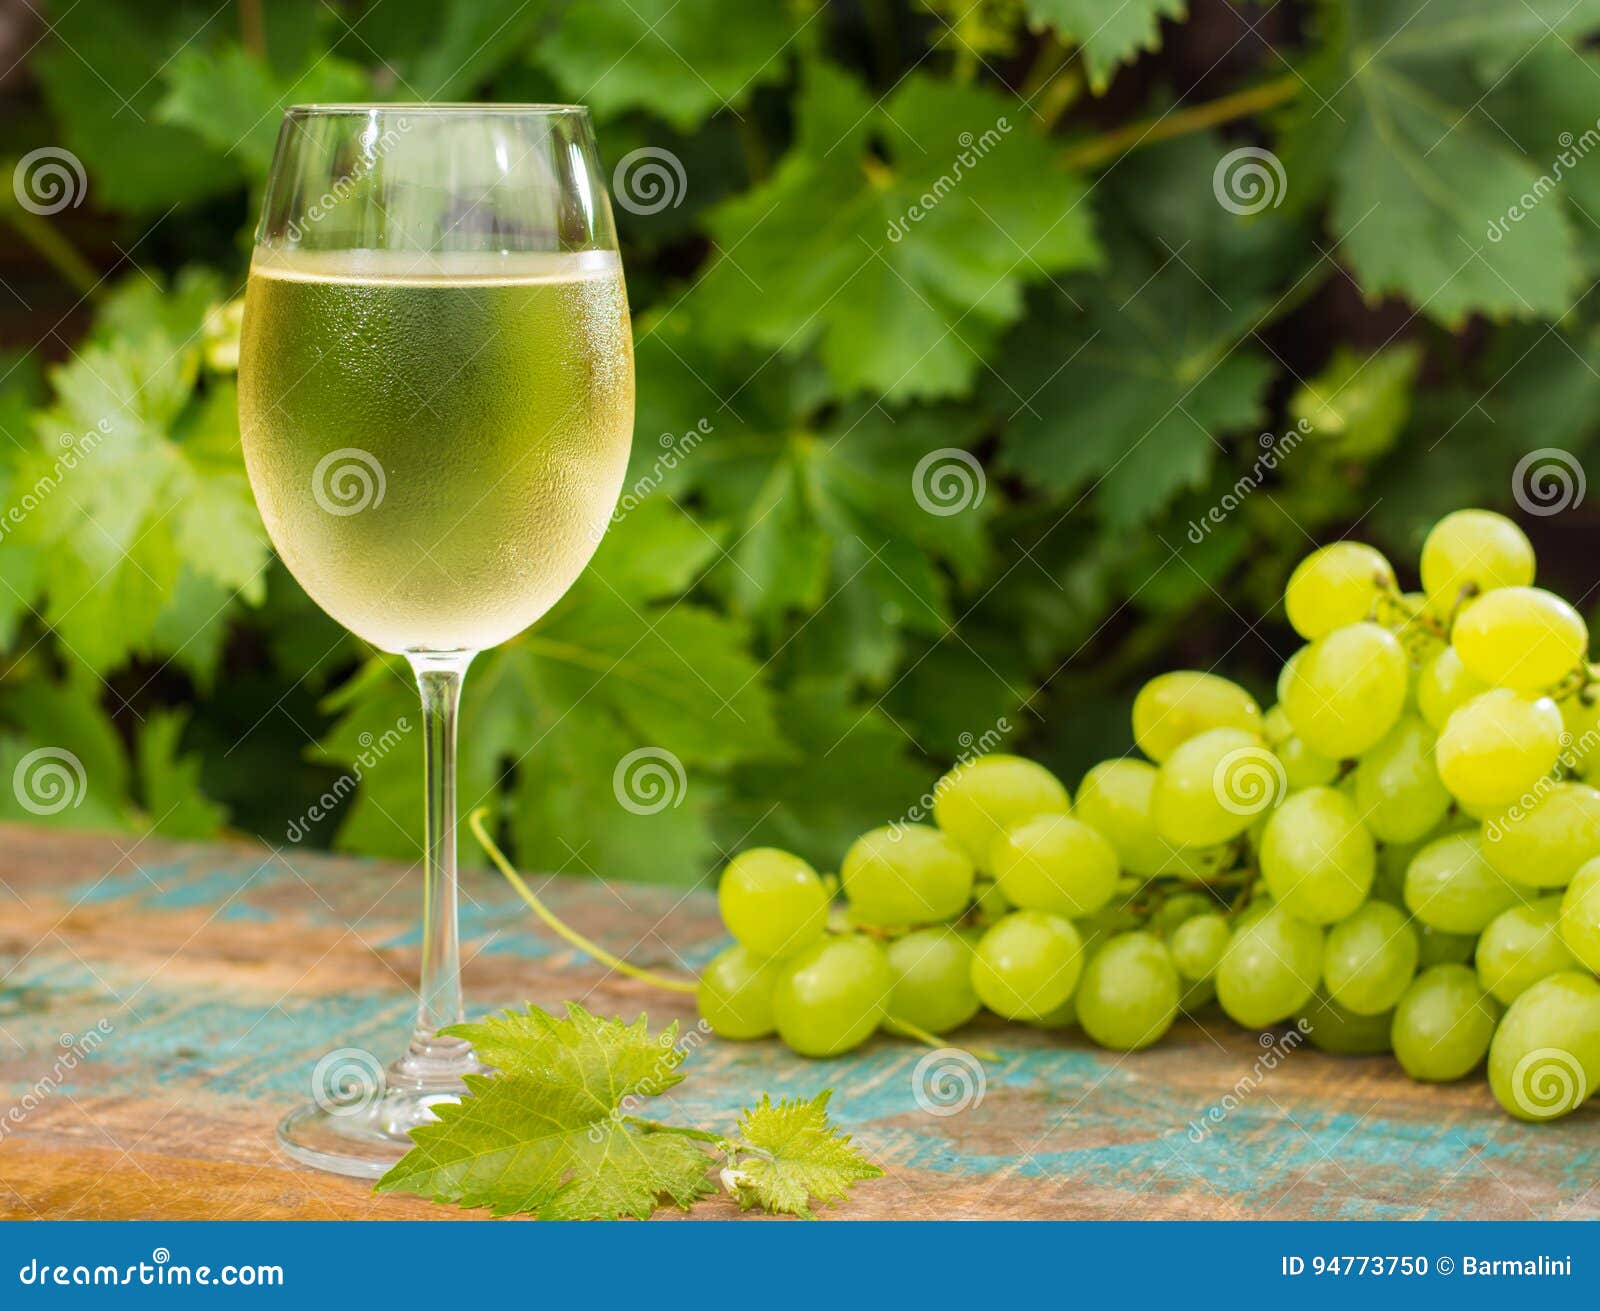 Wine glass with ice cold white wine, outdoor terrace, wine tasting in sunny day, green vineyard garden background and white grape